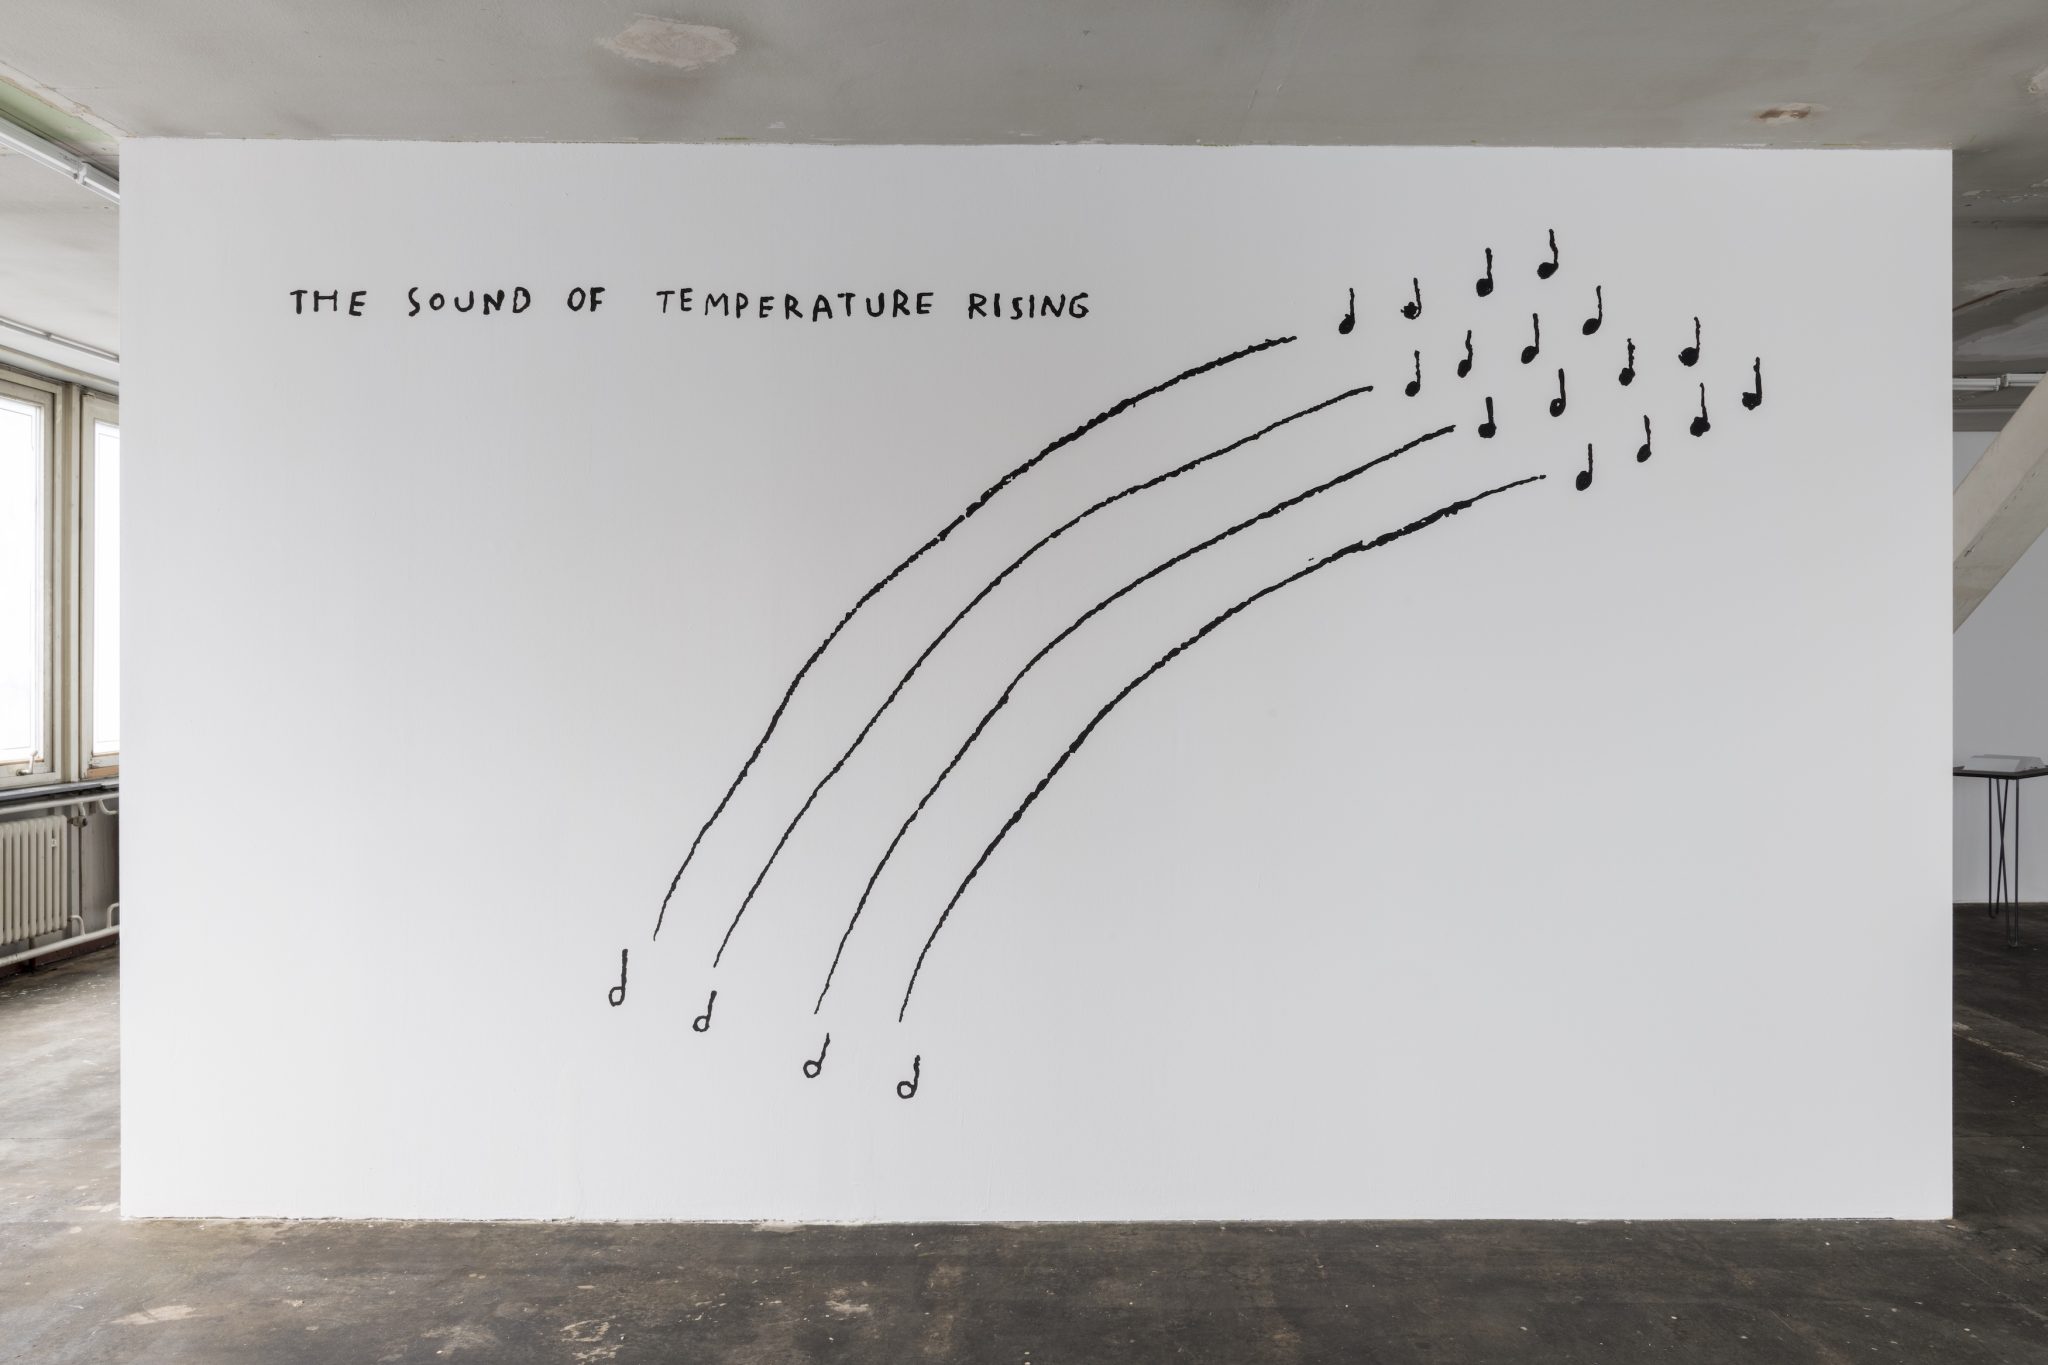 Four long, curved lines
separate four white music
notes and sixteen black
music notes with text “The
sound of the temperature
rising” at the top